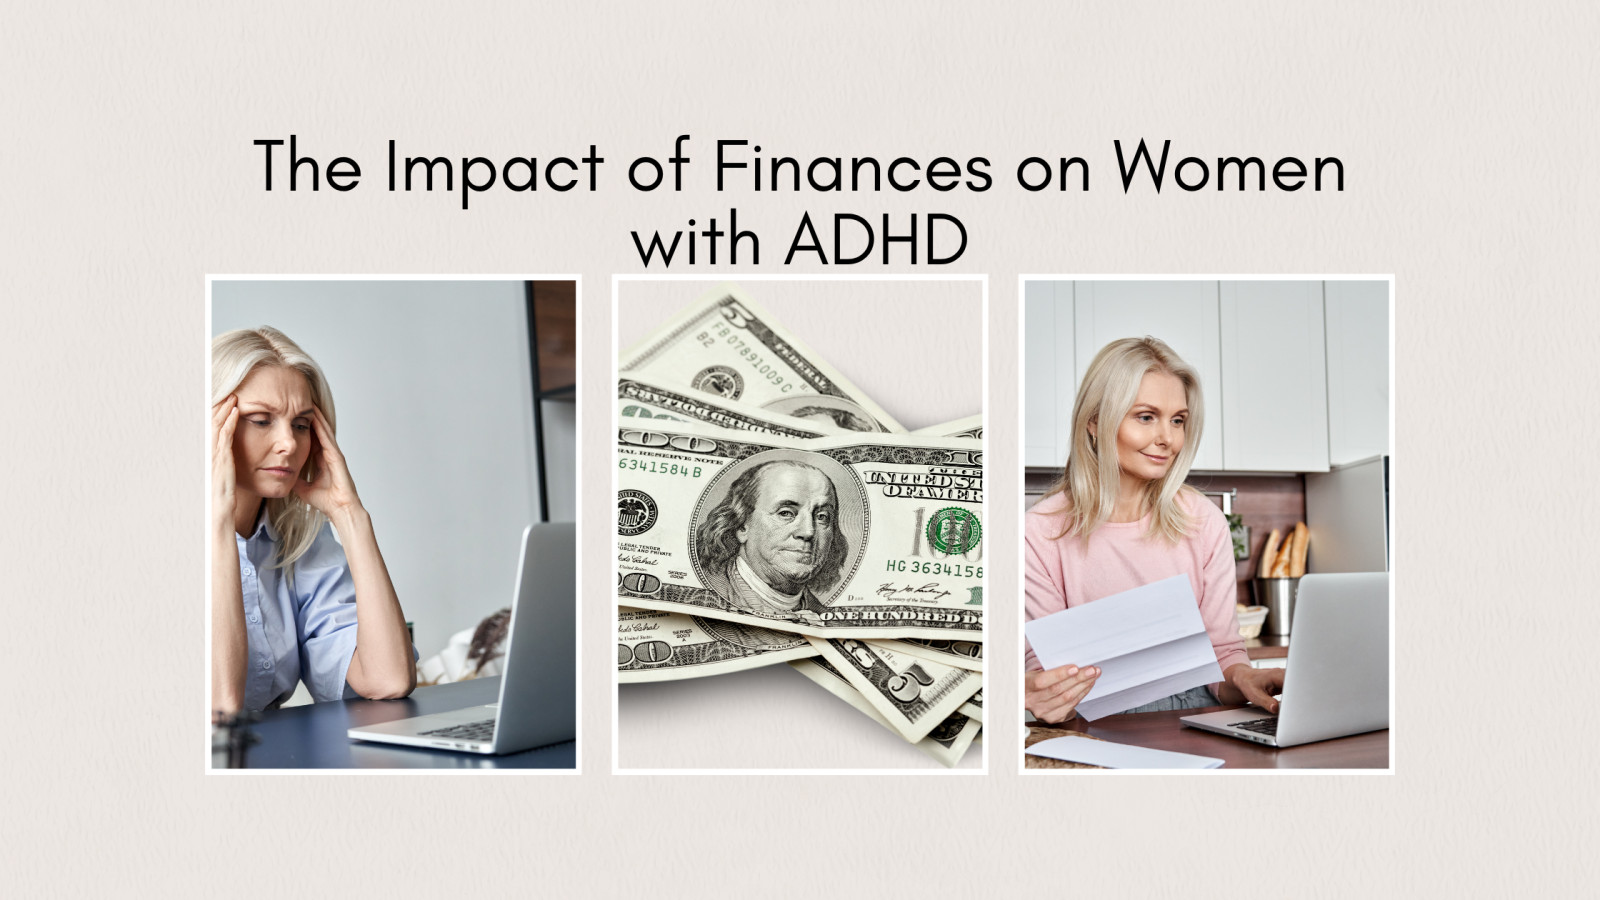 The Impacts of Finances on Women with ADHD: A Multidimensional Lens